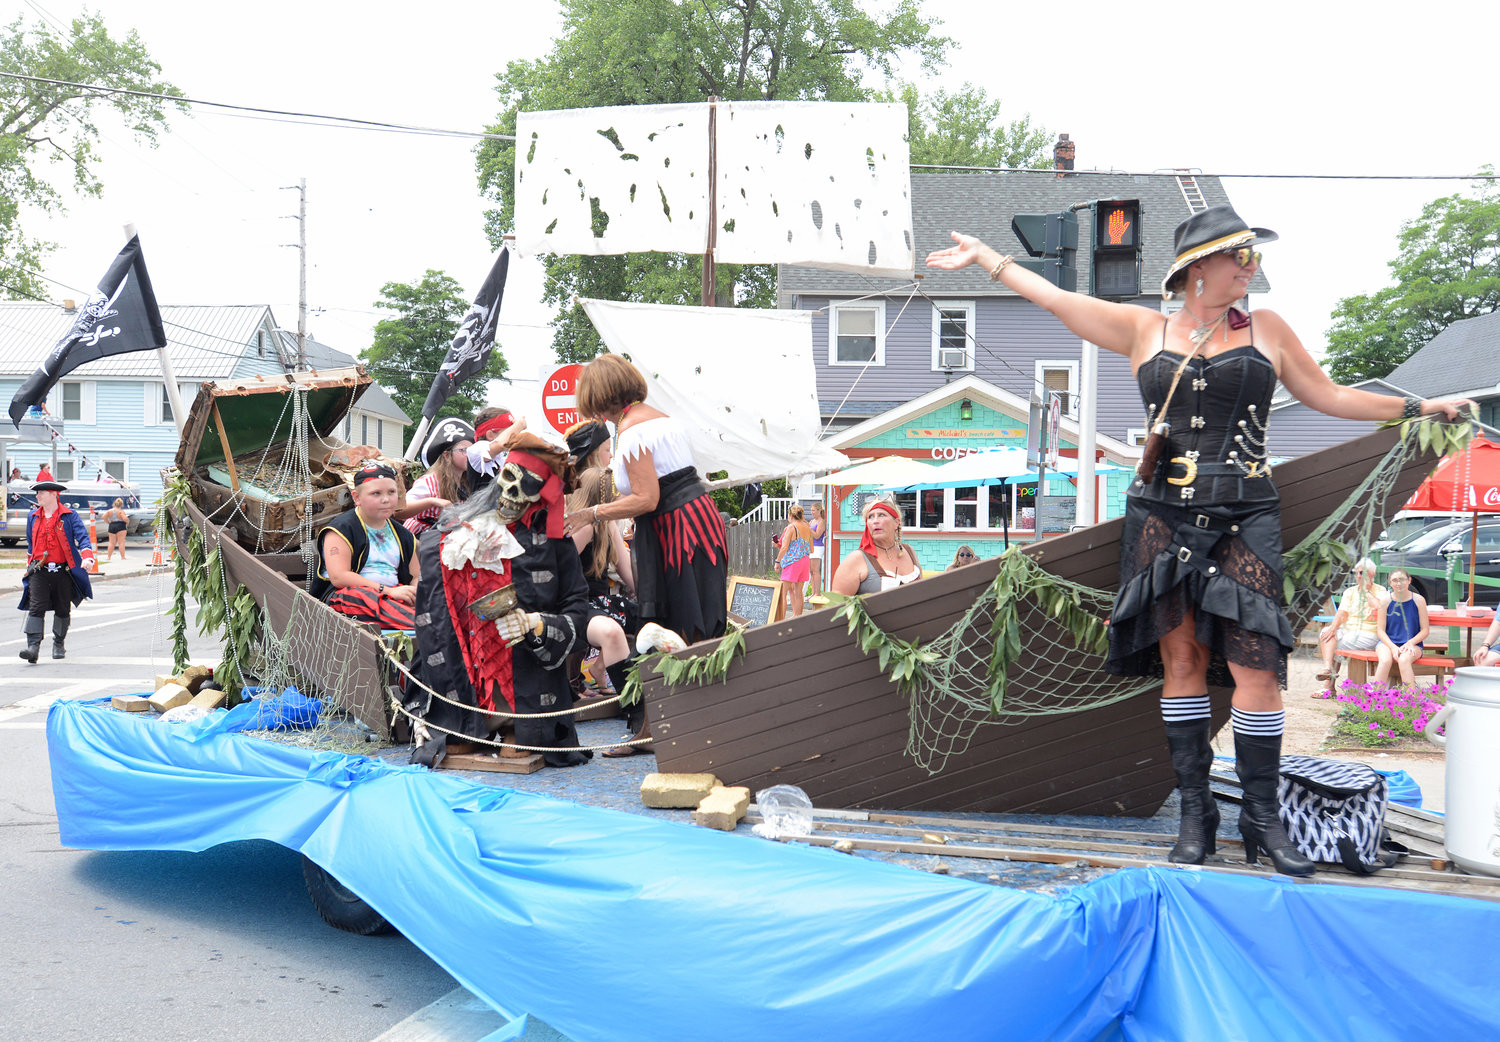 Pirates Weekend at Sylvan Beach is here, kicking off with the pirate's invasion today at 5:45 p.m. From 6 p.m. onwards, there will be various entertainment venues at local businesses throughout the Beach, including the classic car show near the grassy area of the Beach. The 8th annual parade starts at 1 p.m. on Saturday, July 16.